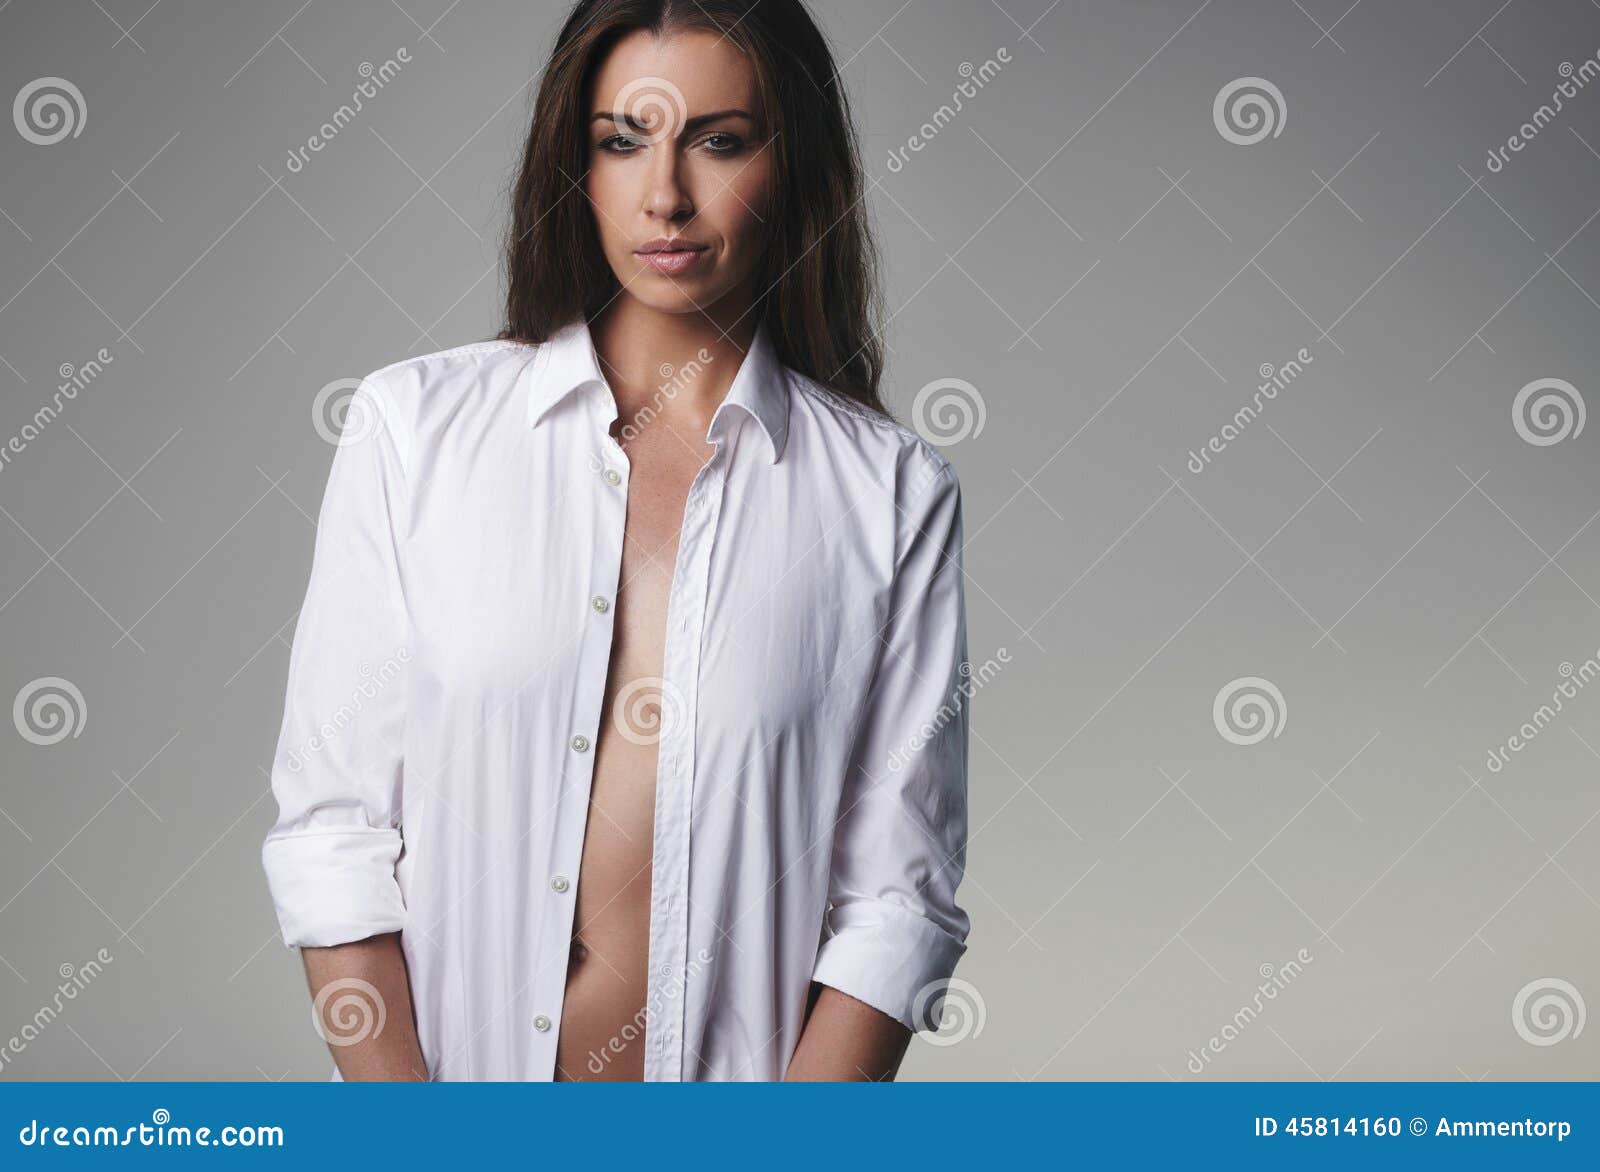 Photo about Natural young woman wearing an unbuttoned shirt and looking at ...